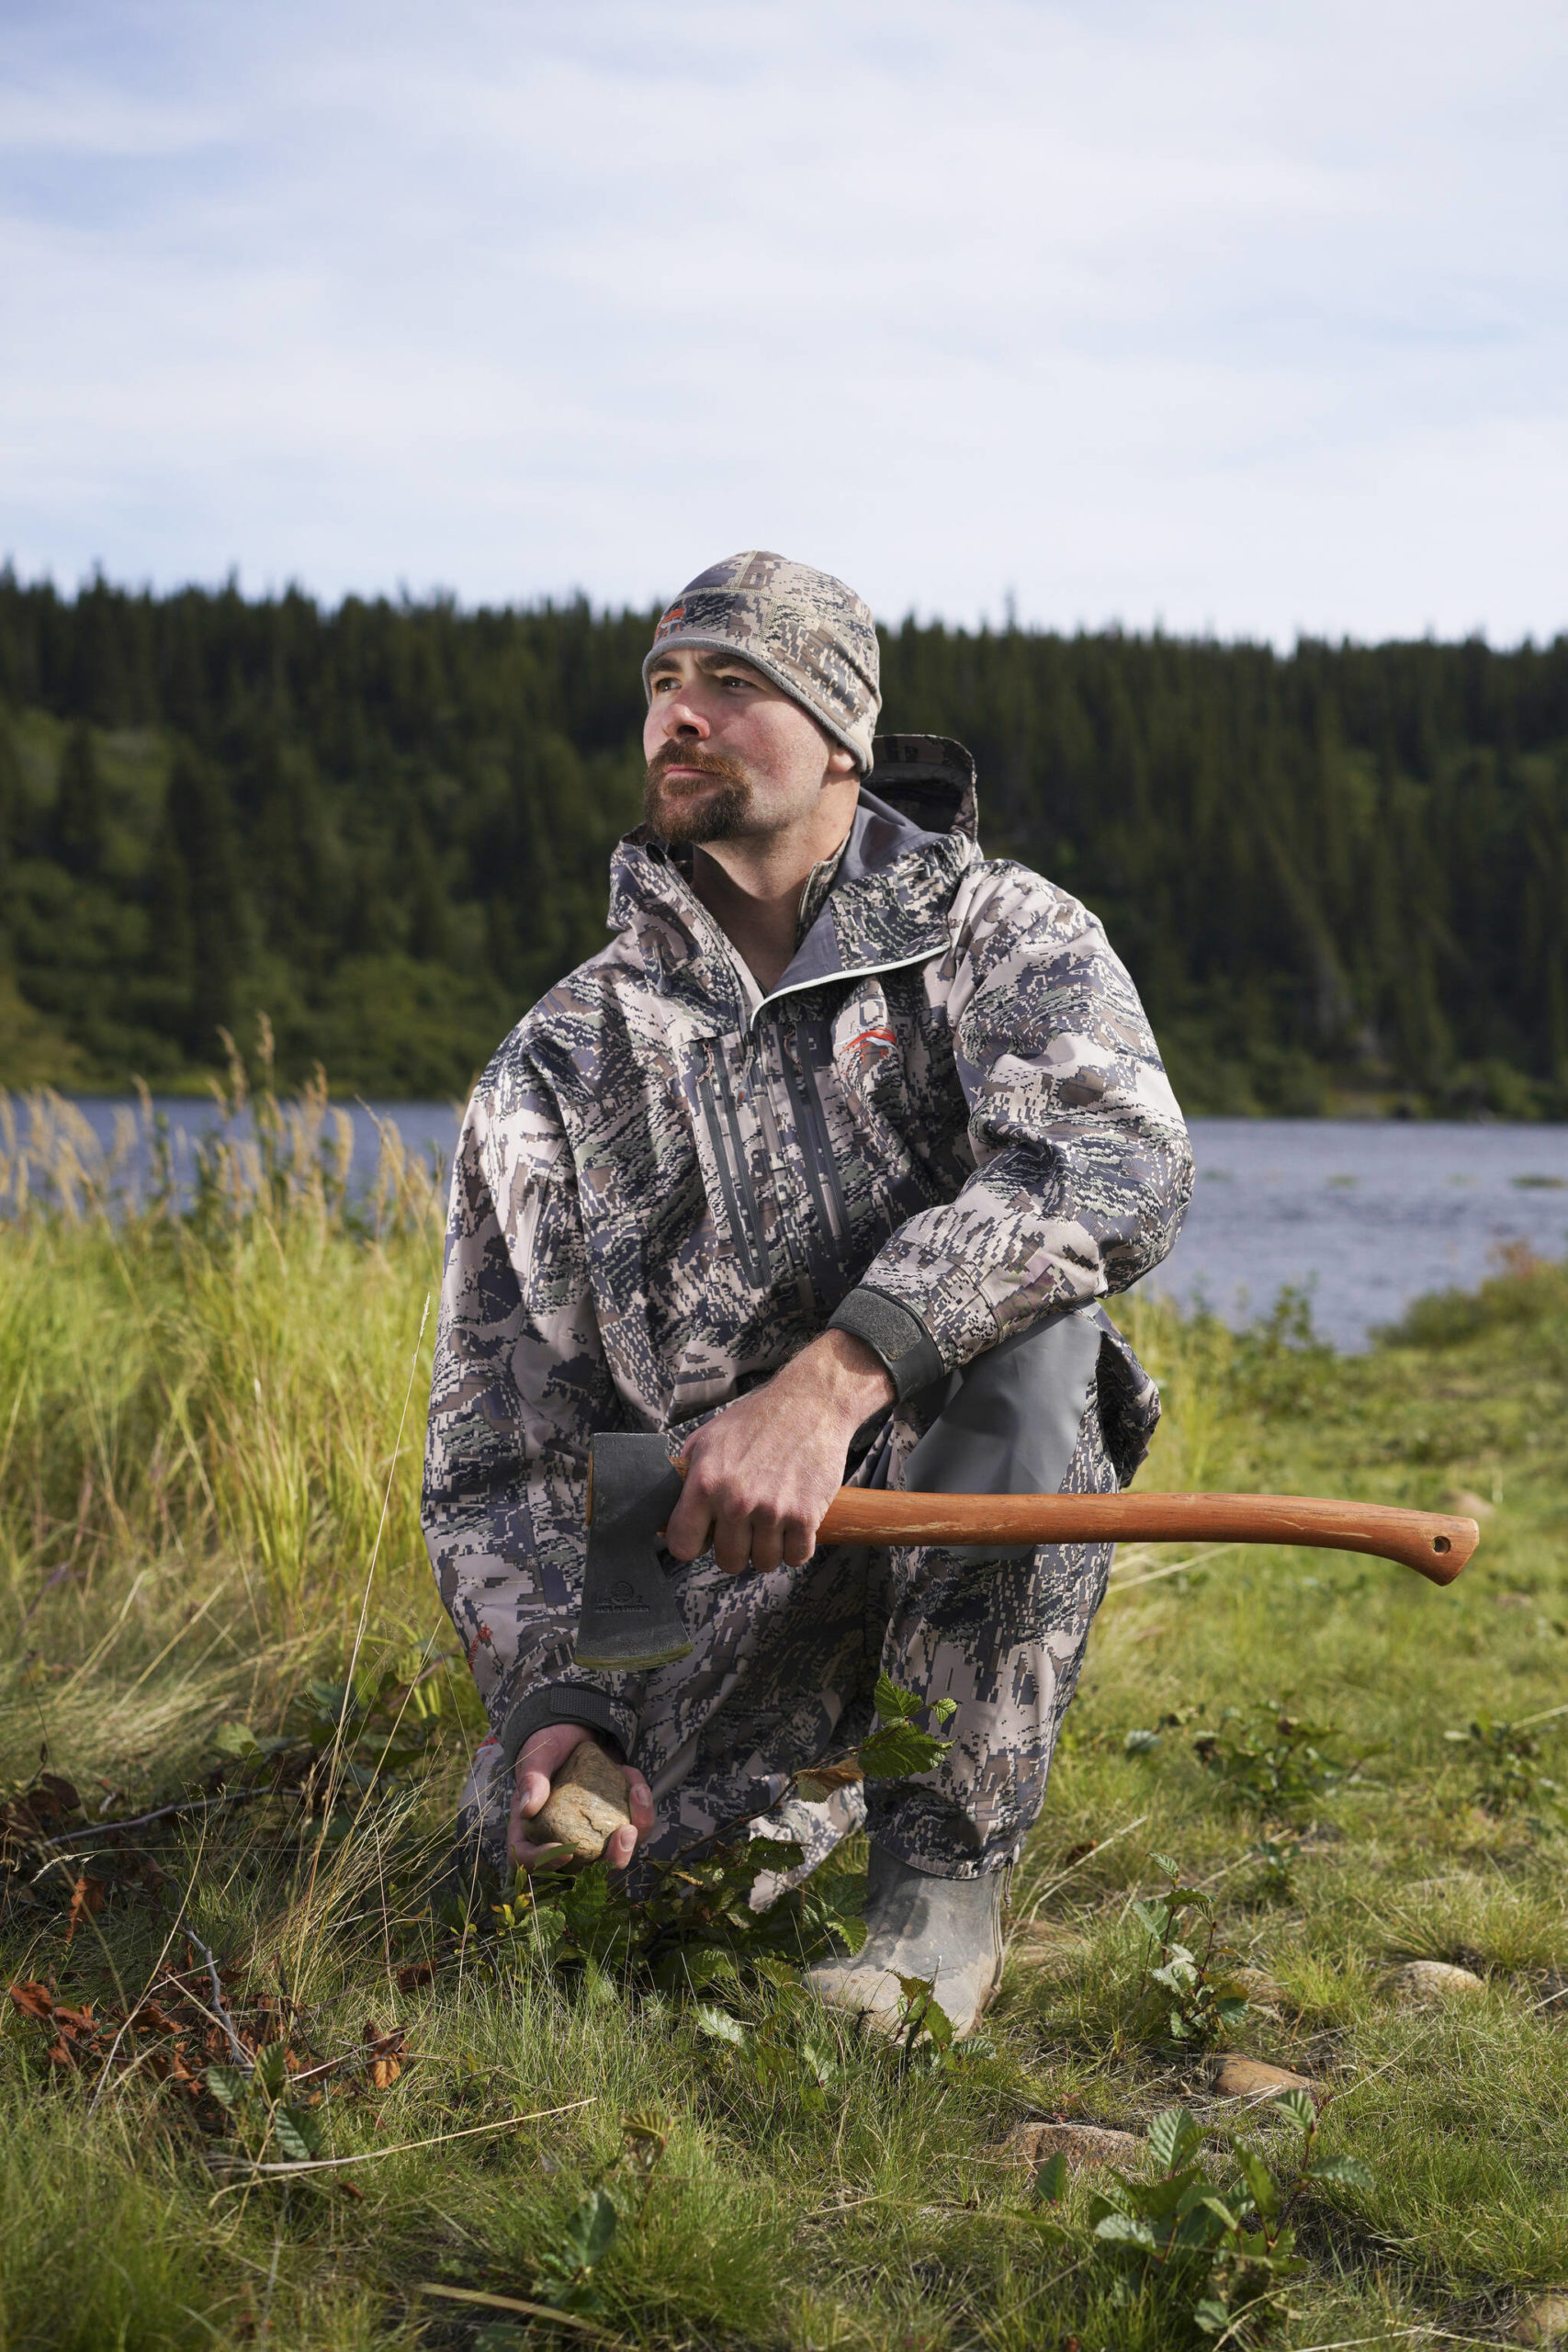 “Alone” participant Terry Burns of Homer, Alaska, poses for a photo in the reality TV show about surviving in the wilderness. (Photo by Brendan George Ko/History Channel)